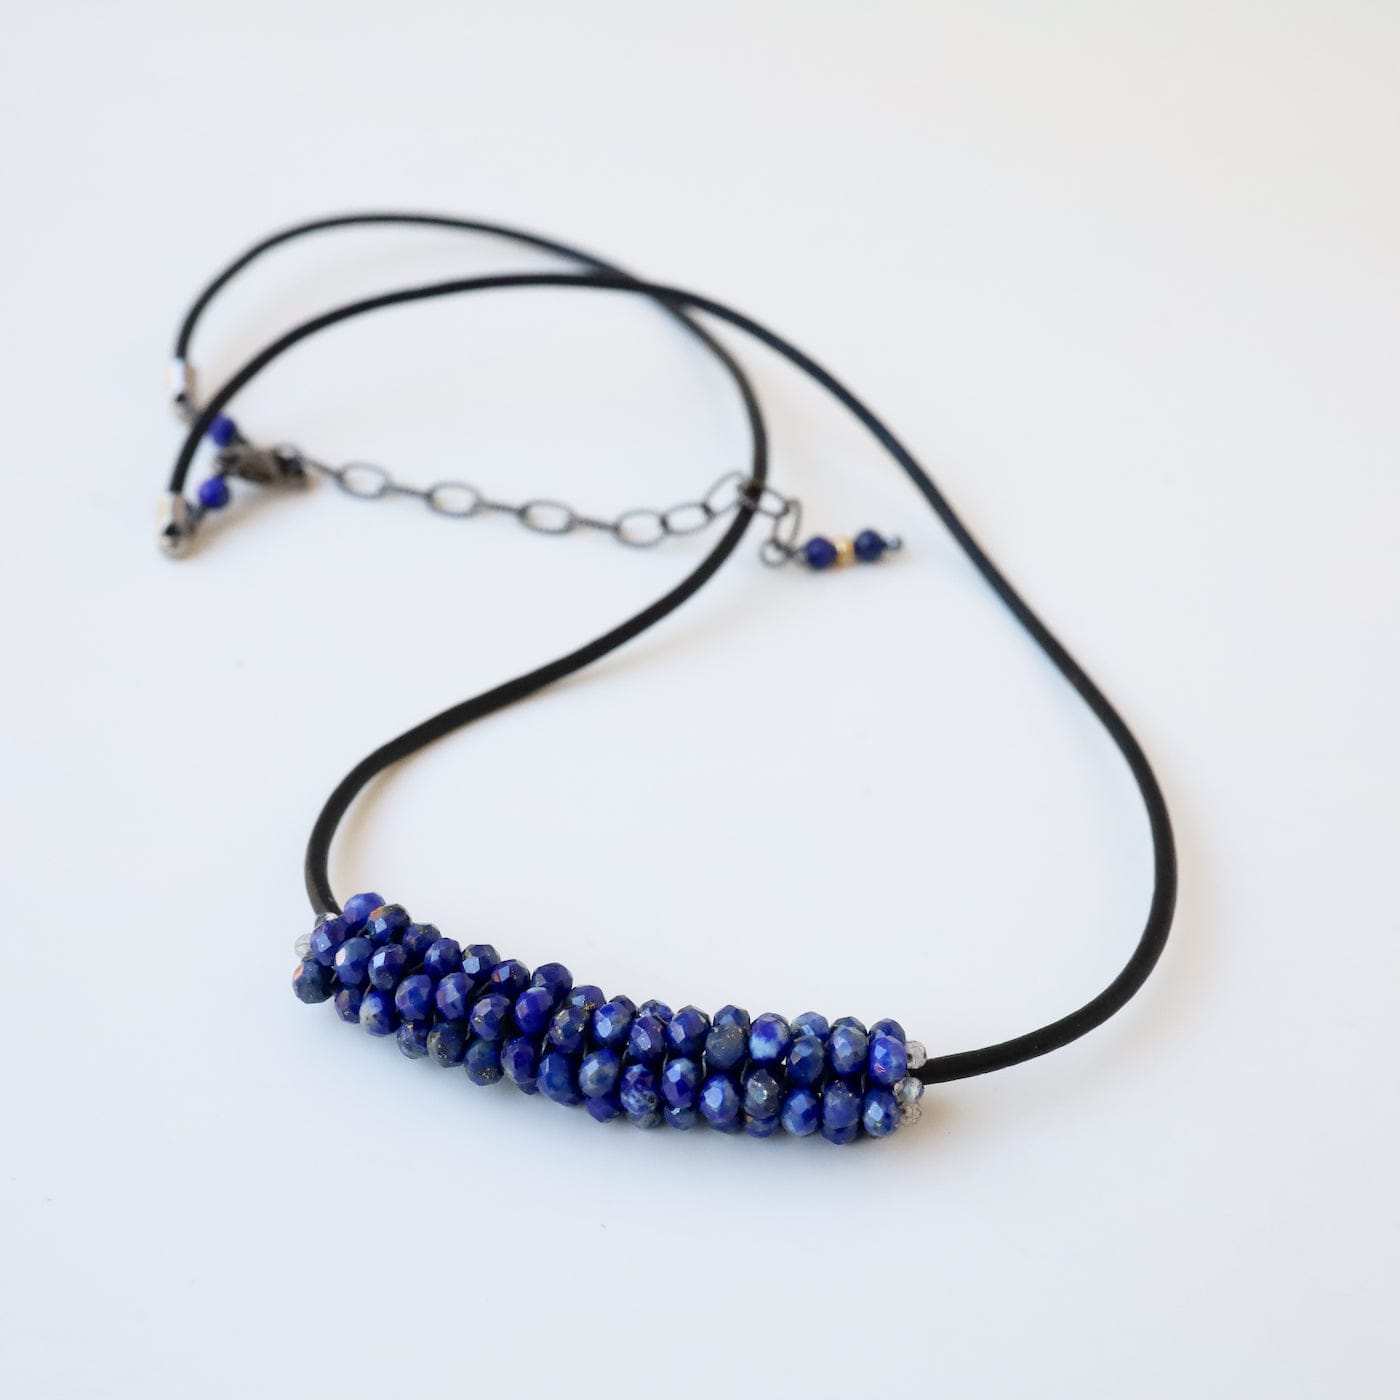 NKL-JM Hand Stitched Lapis with Silver Trim Necklace